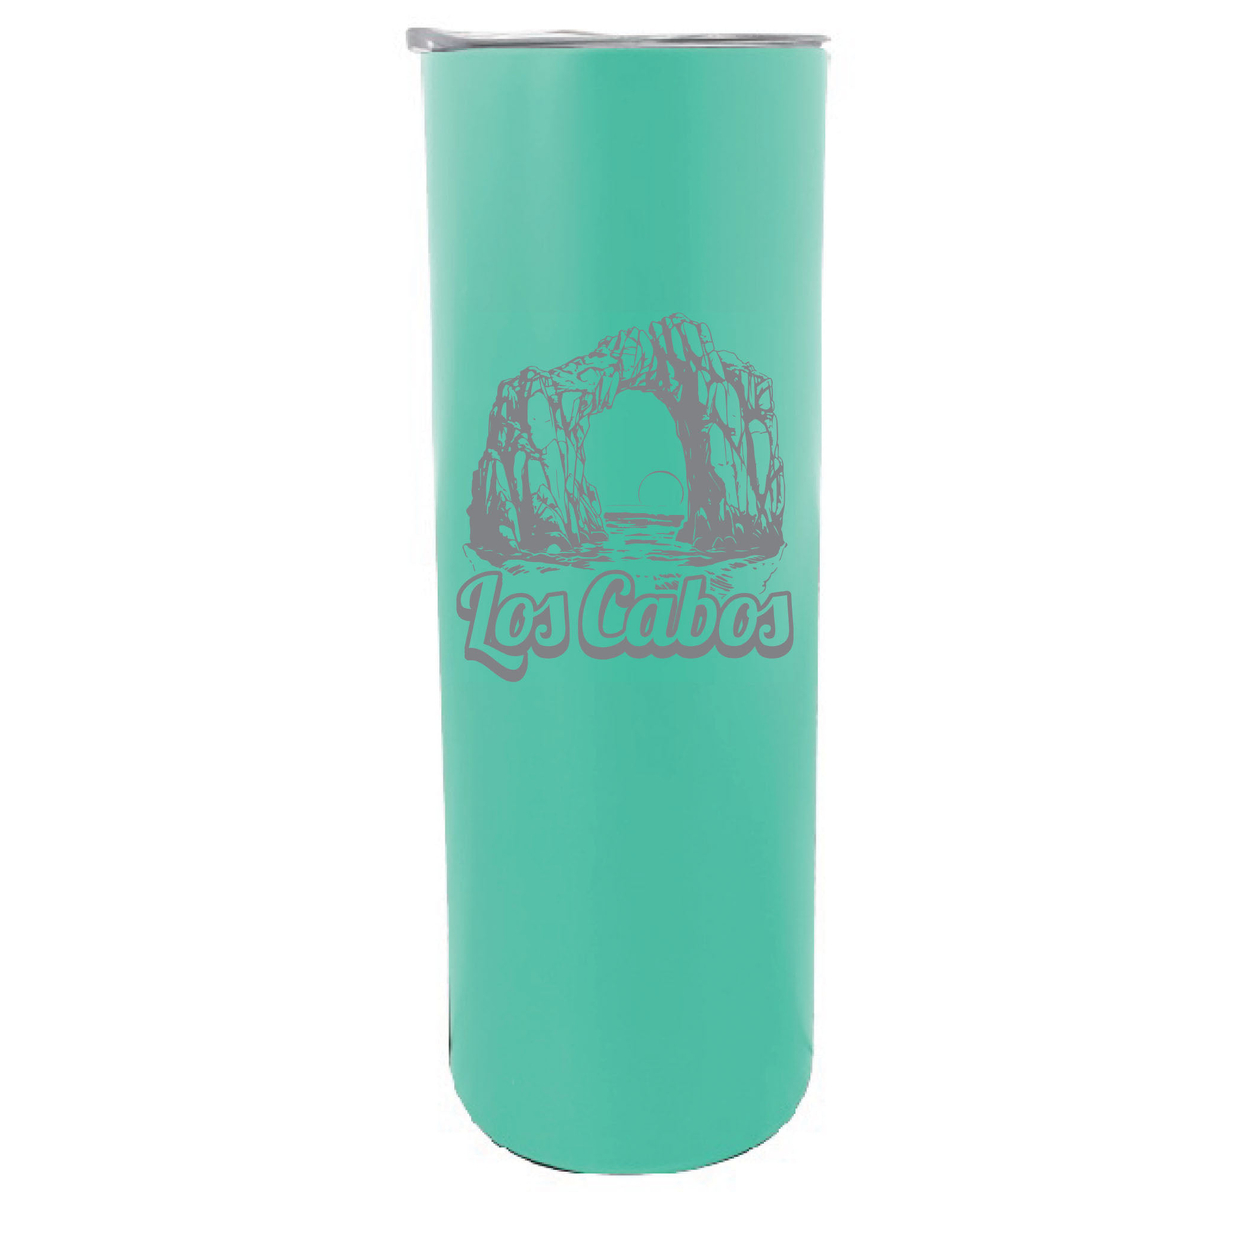 Los Cabos Mexico Souvenir 20 Oz Engraved Insulated Stainless Steel Skinny Tumbler - Seafoam,,Single Unit